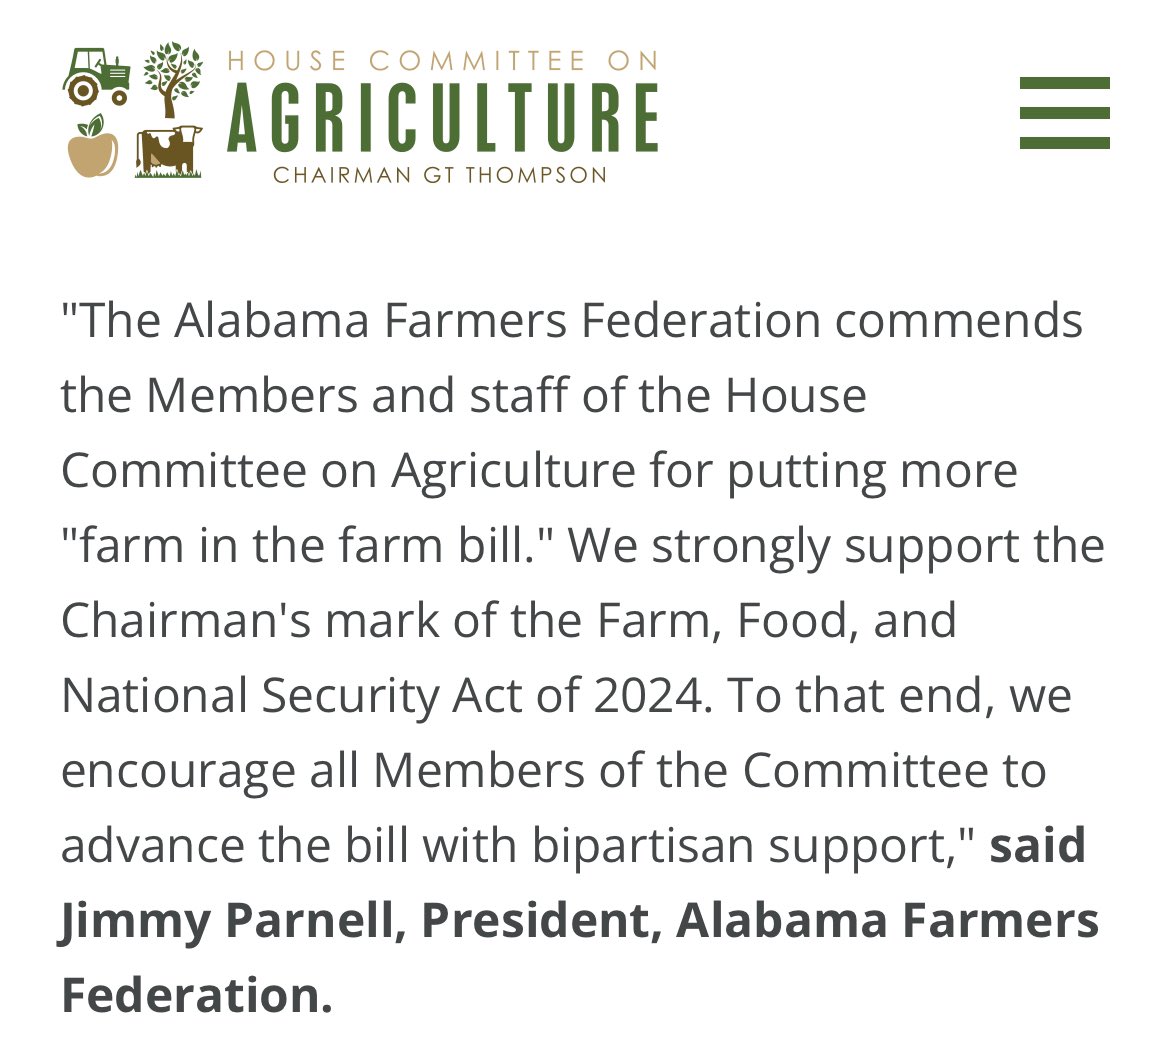 We commend the Members and staff of the House Committee on Agriculture for putting more 'farm in the farm bill.' We strongly support the Chairman's mark of the Farm, Food, and National Security Act of 2024. @RepBarryMoore @CongressmanGT